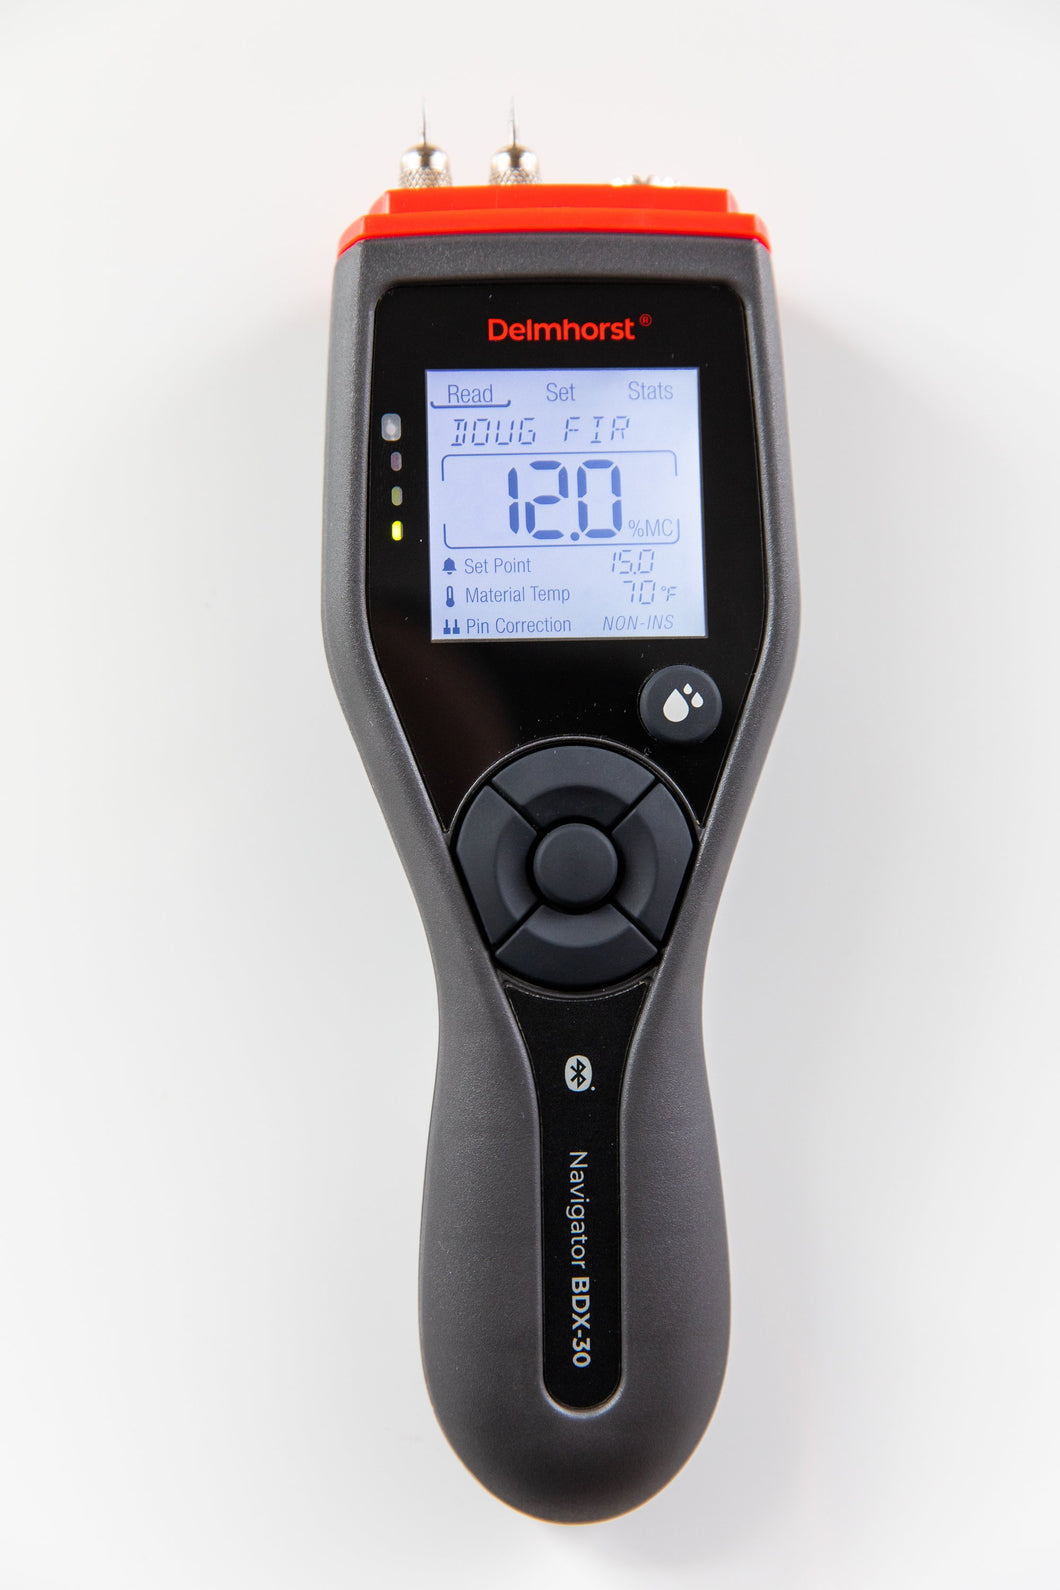 Delmhorst BDX-30 Moisture Meter with Contractor's Package